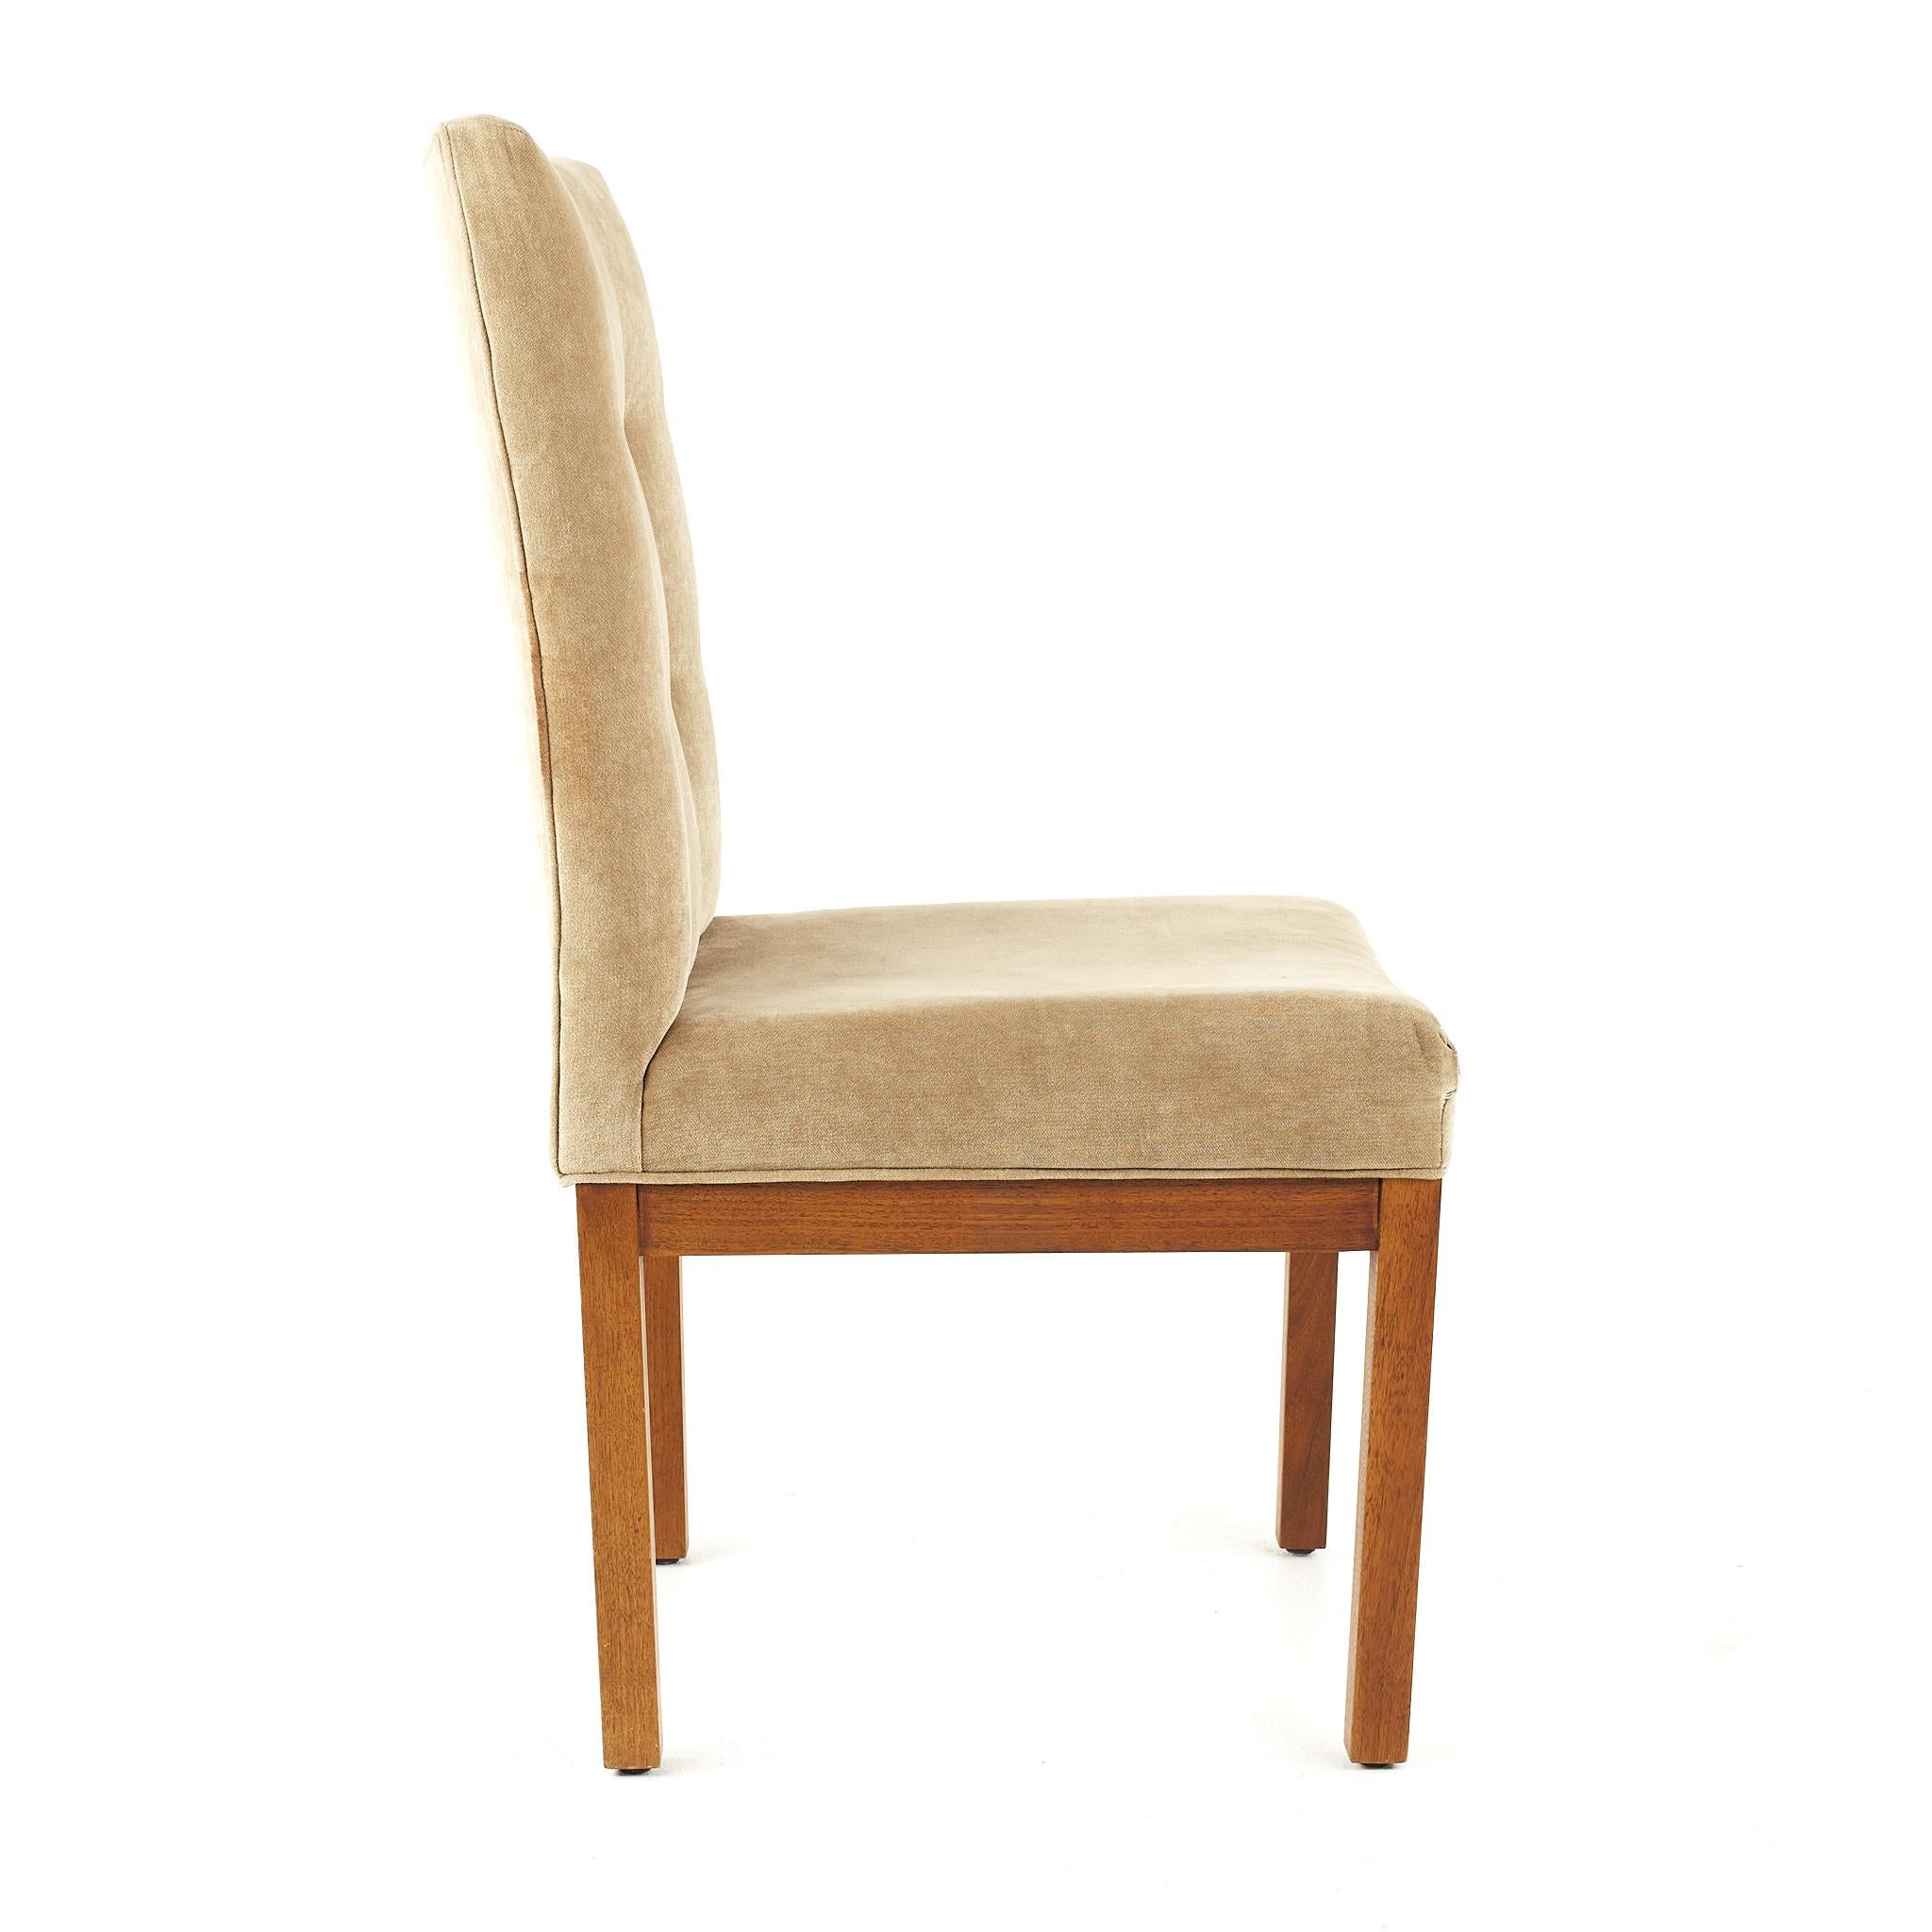 American Dillingham Mid Century Walnut Tufted Dining Chairs, Set of 4 For Sale